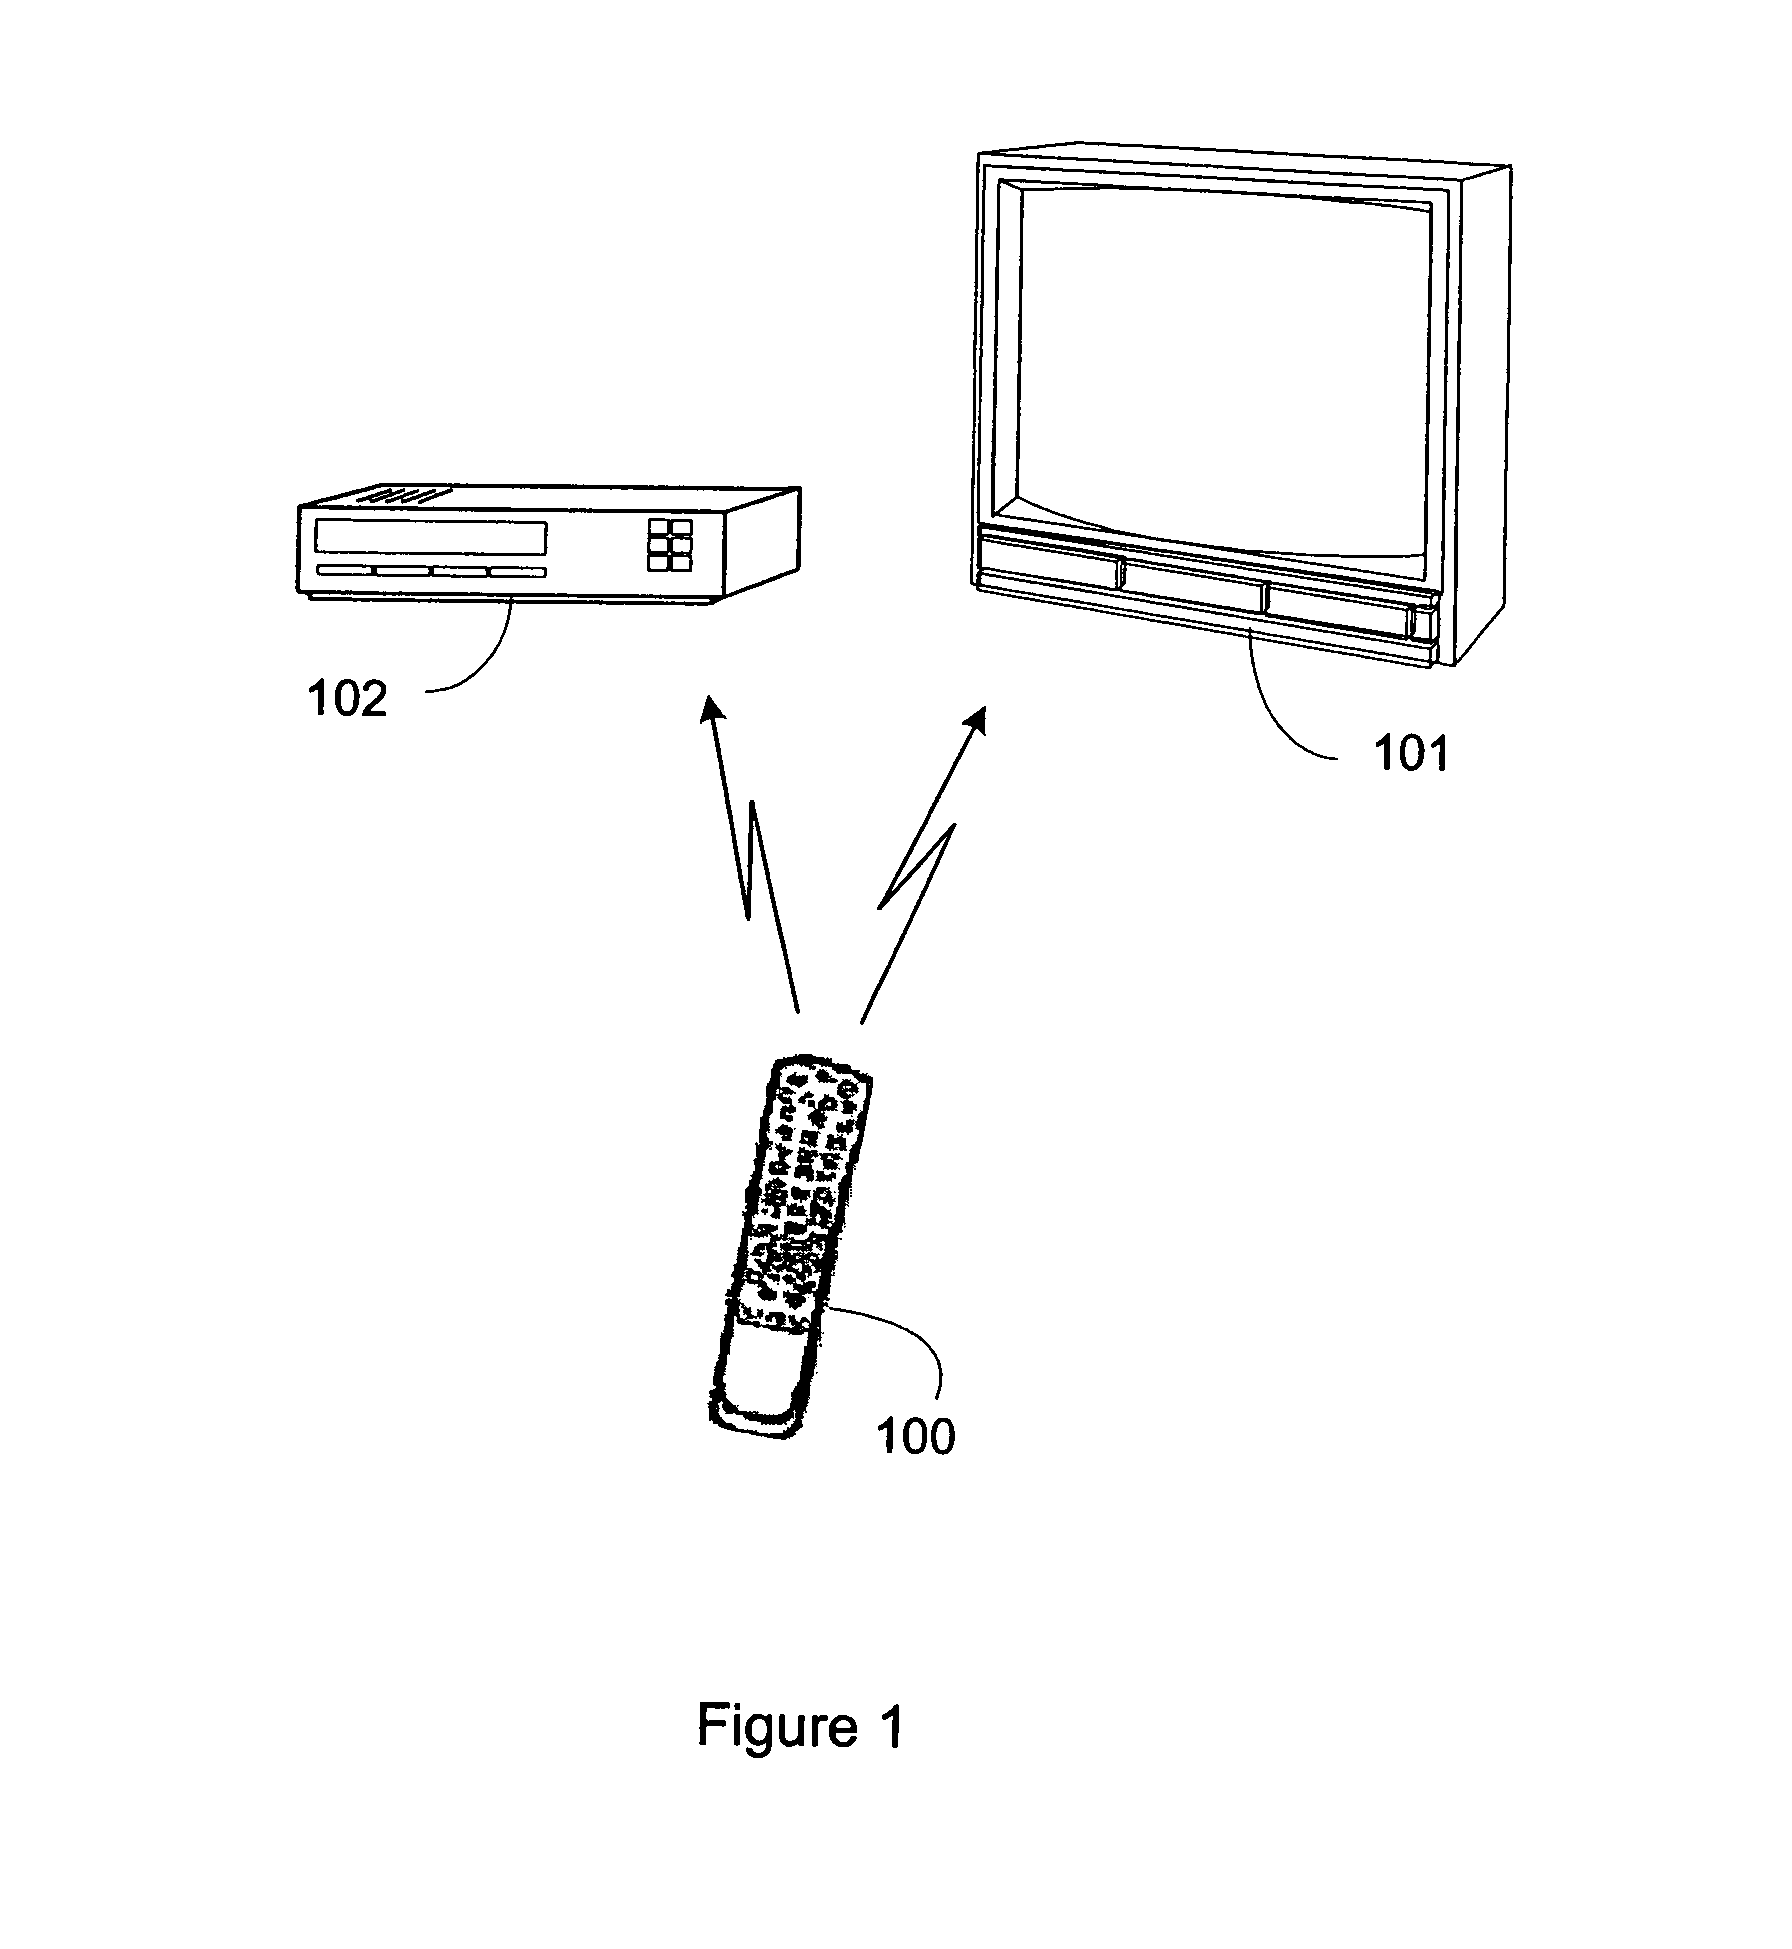 System and method for using an universal remote control to access extended operational functions of a device